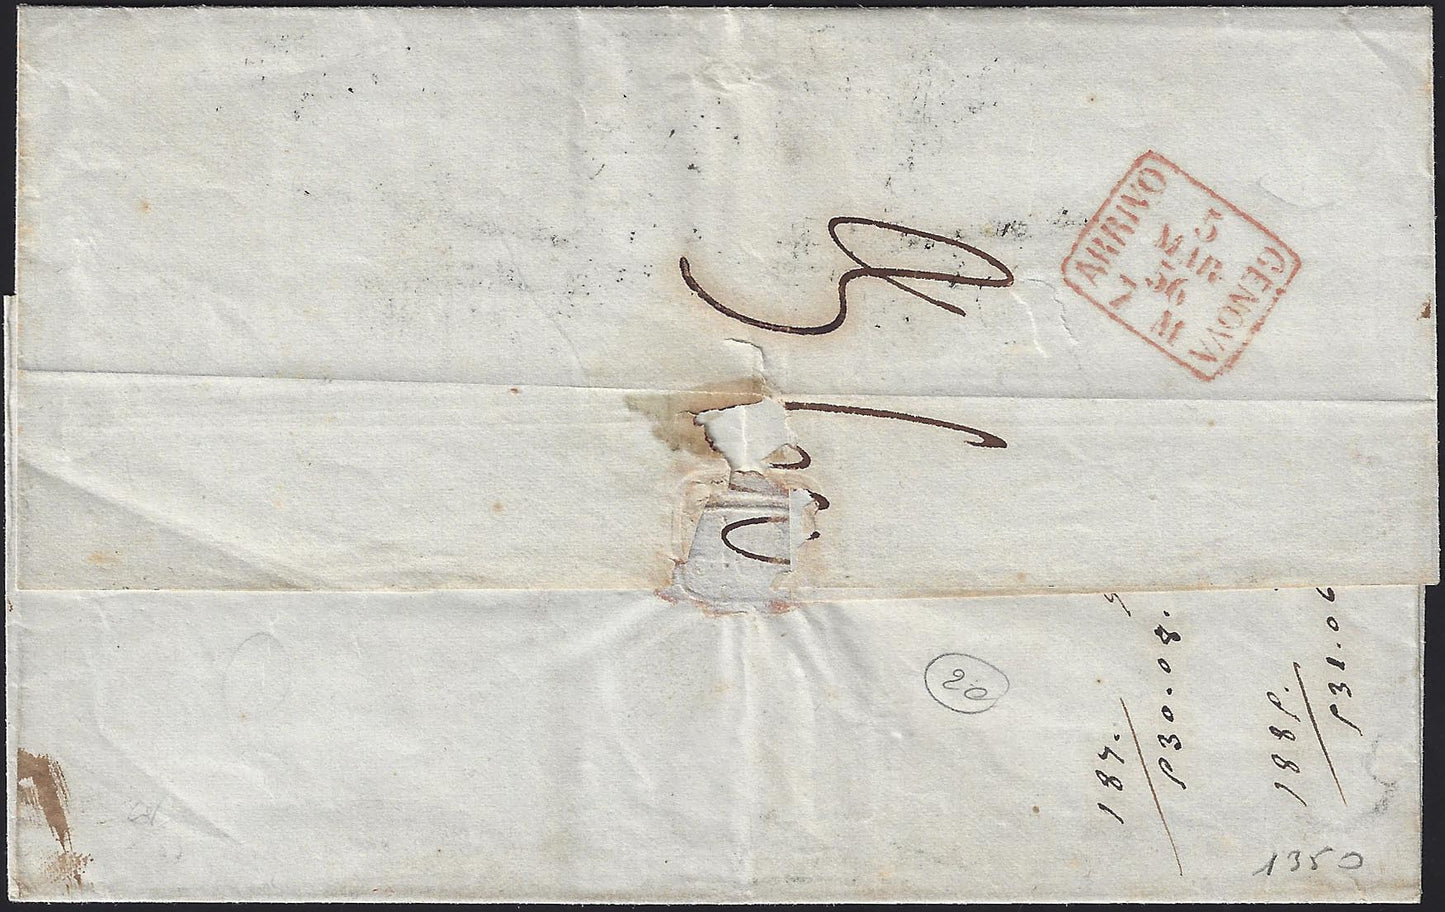 BO23-9 1856- Letter sent from Rome to Genoa 1/3/56 franked with 5 pink baj strip of 4 copies (6)